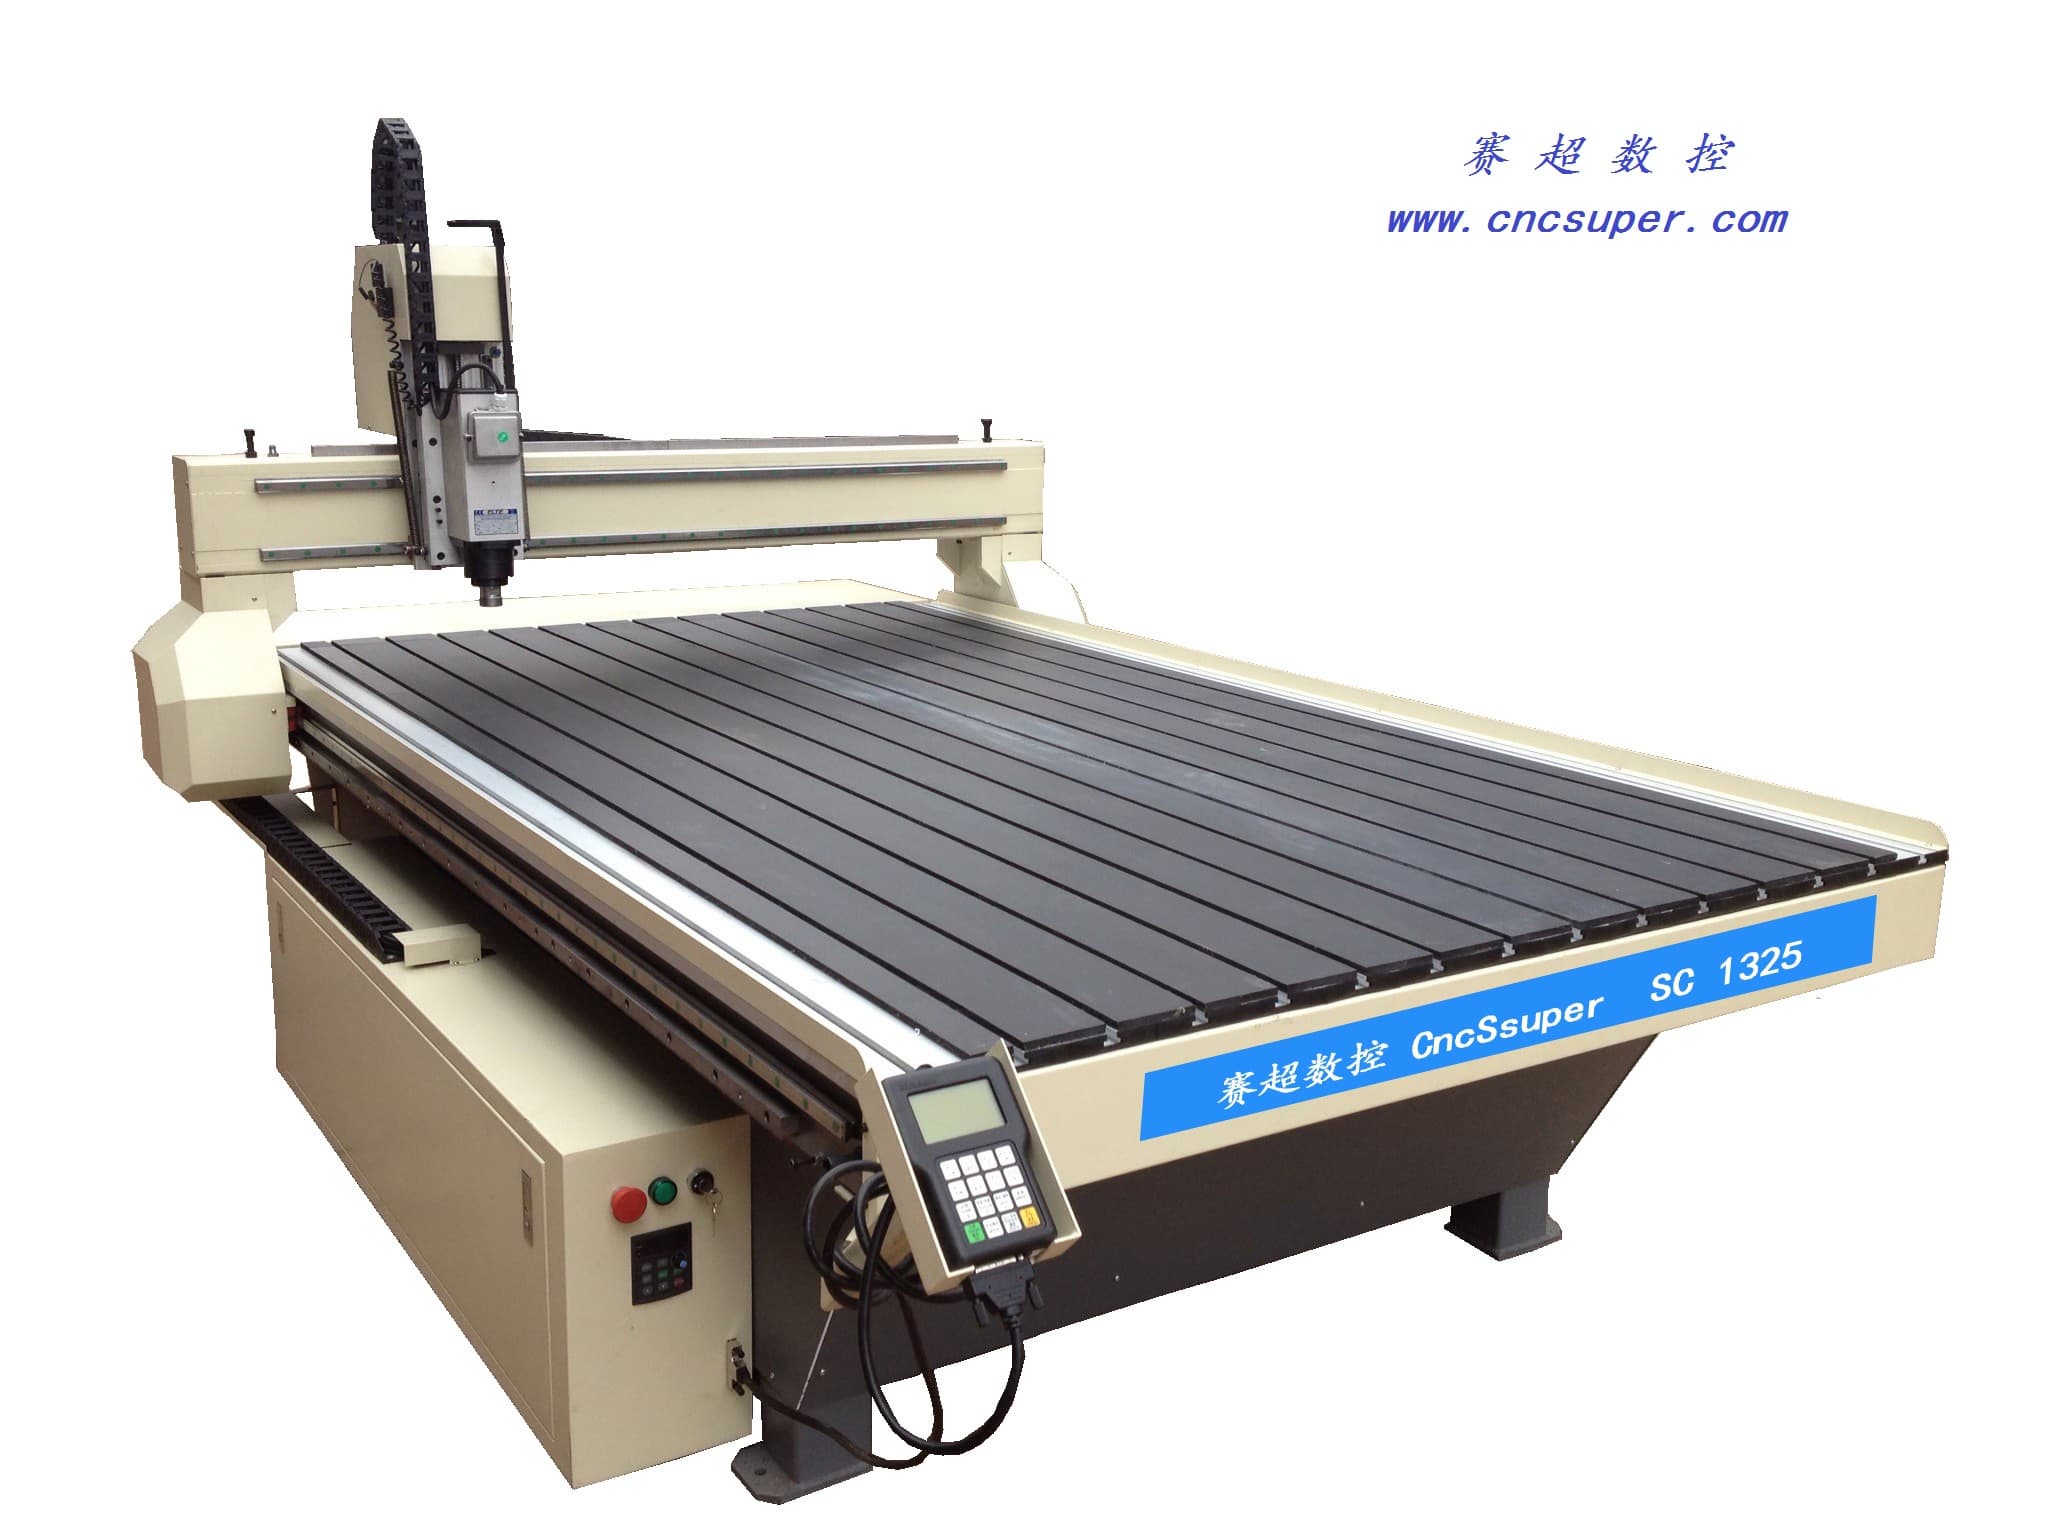 Advertising engraving machine SC1325 with DSP